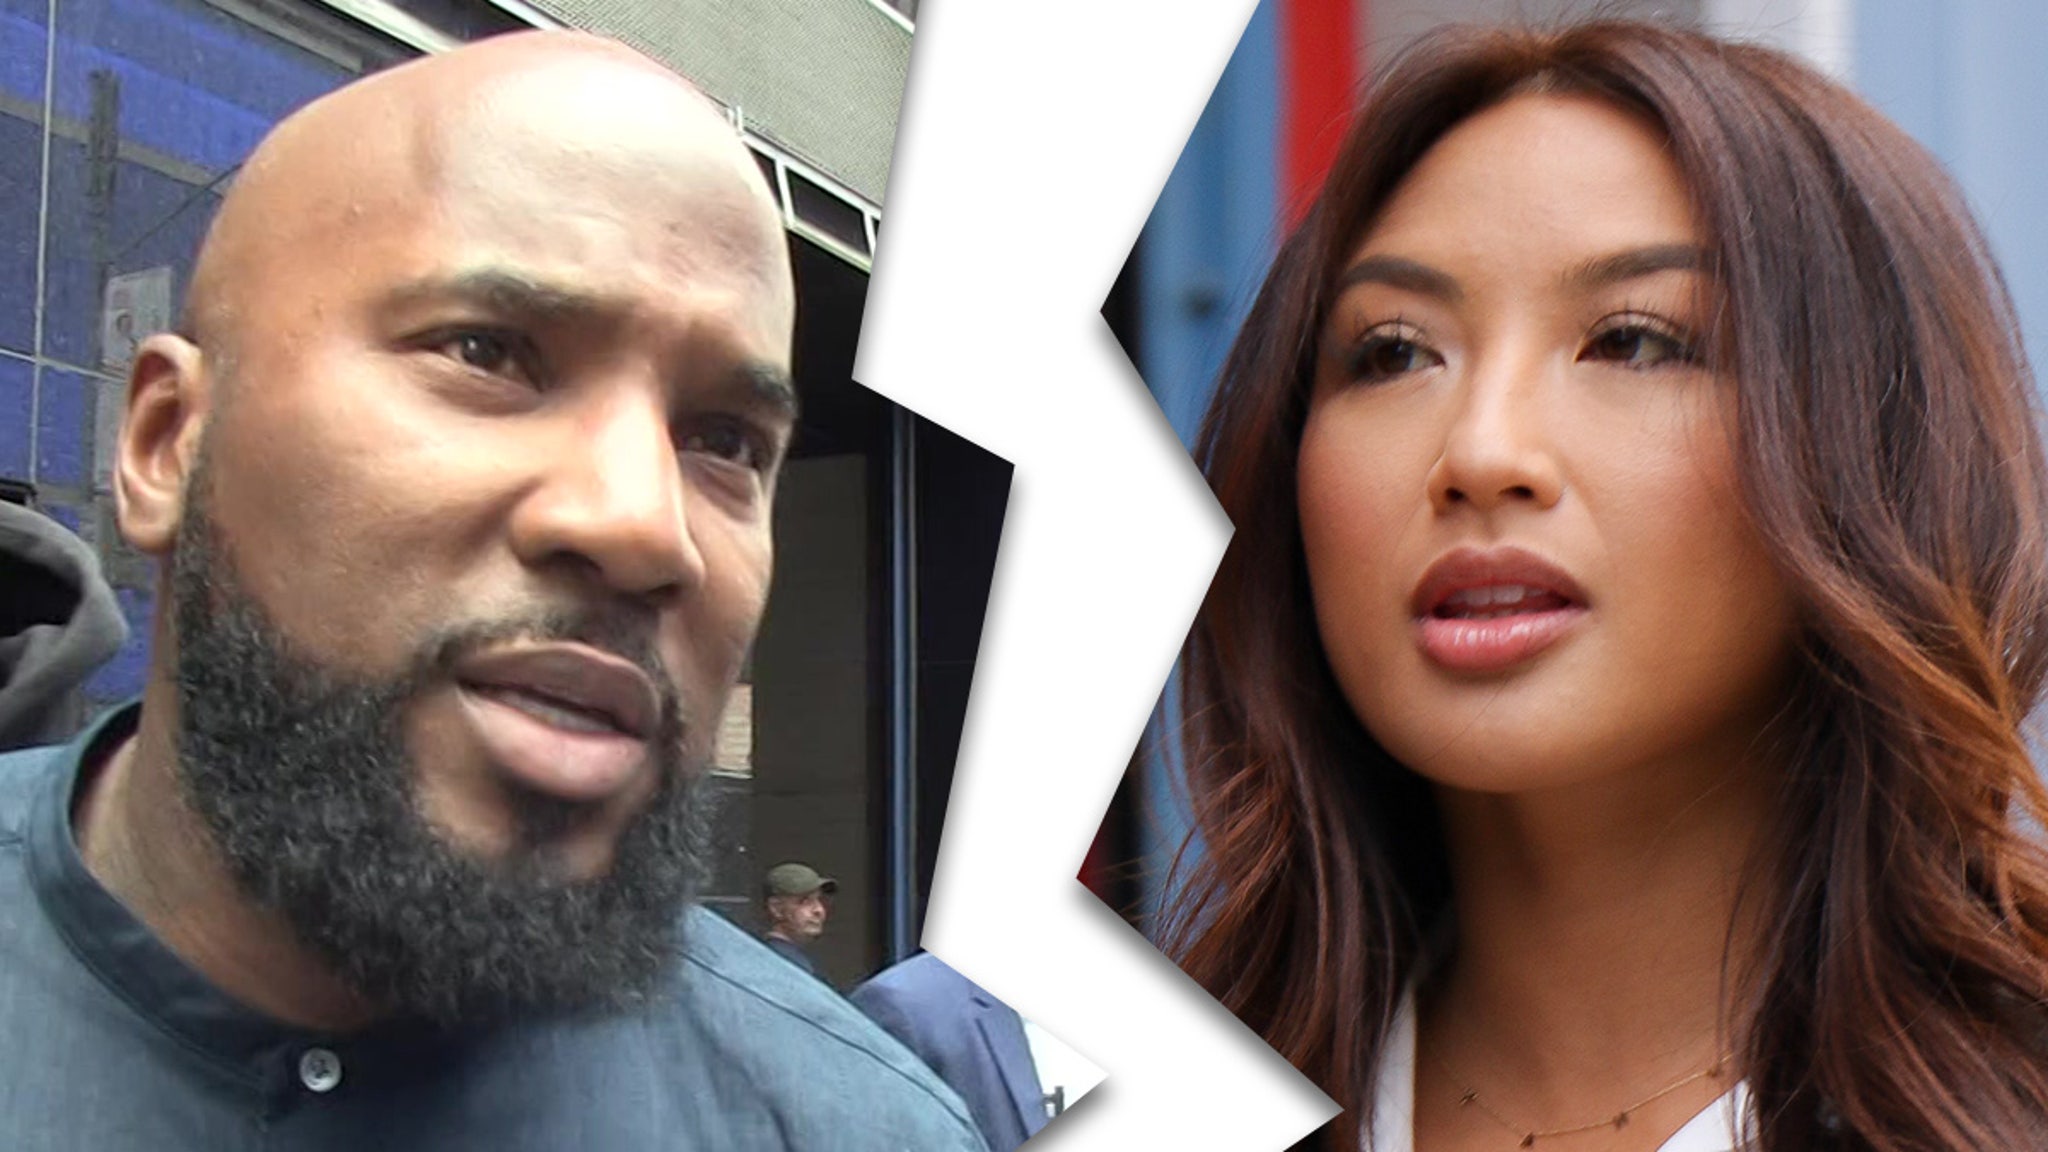 Jeezy Files for Divorce From Jeannie Mai After 2 Years of Marriage